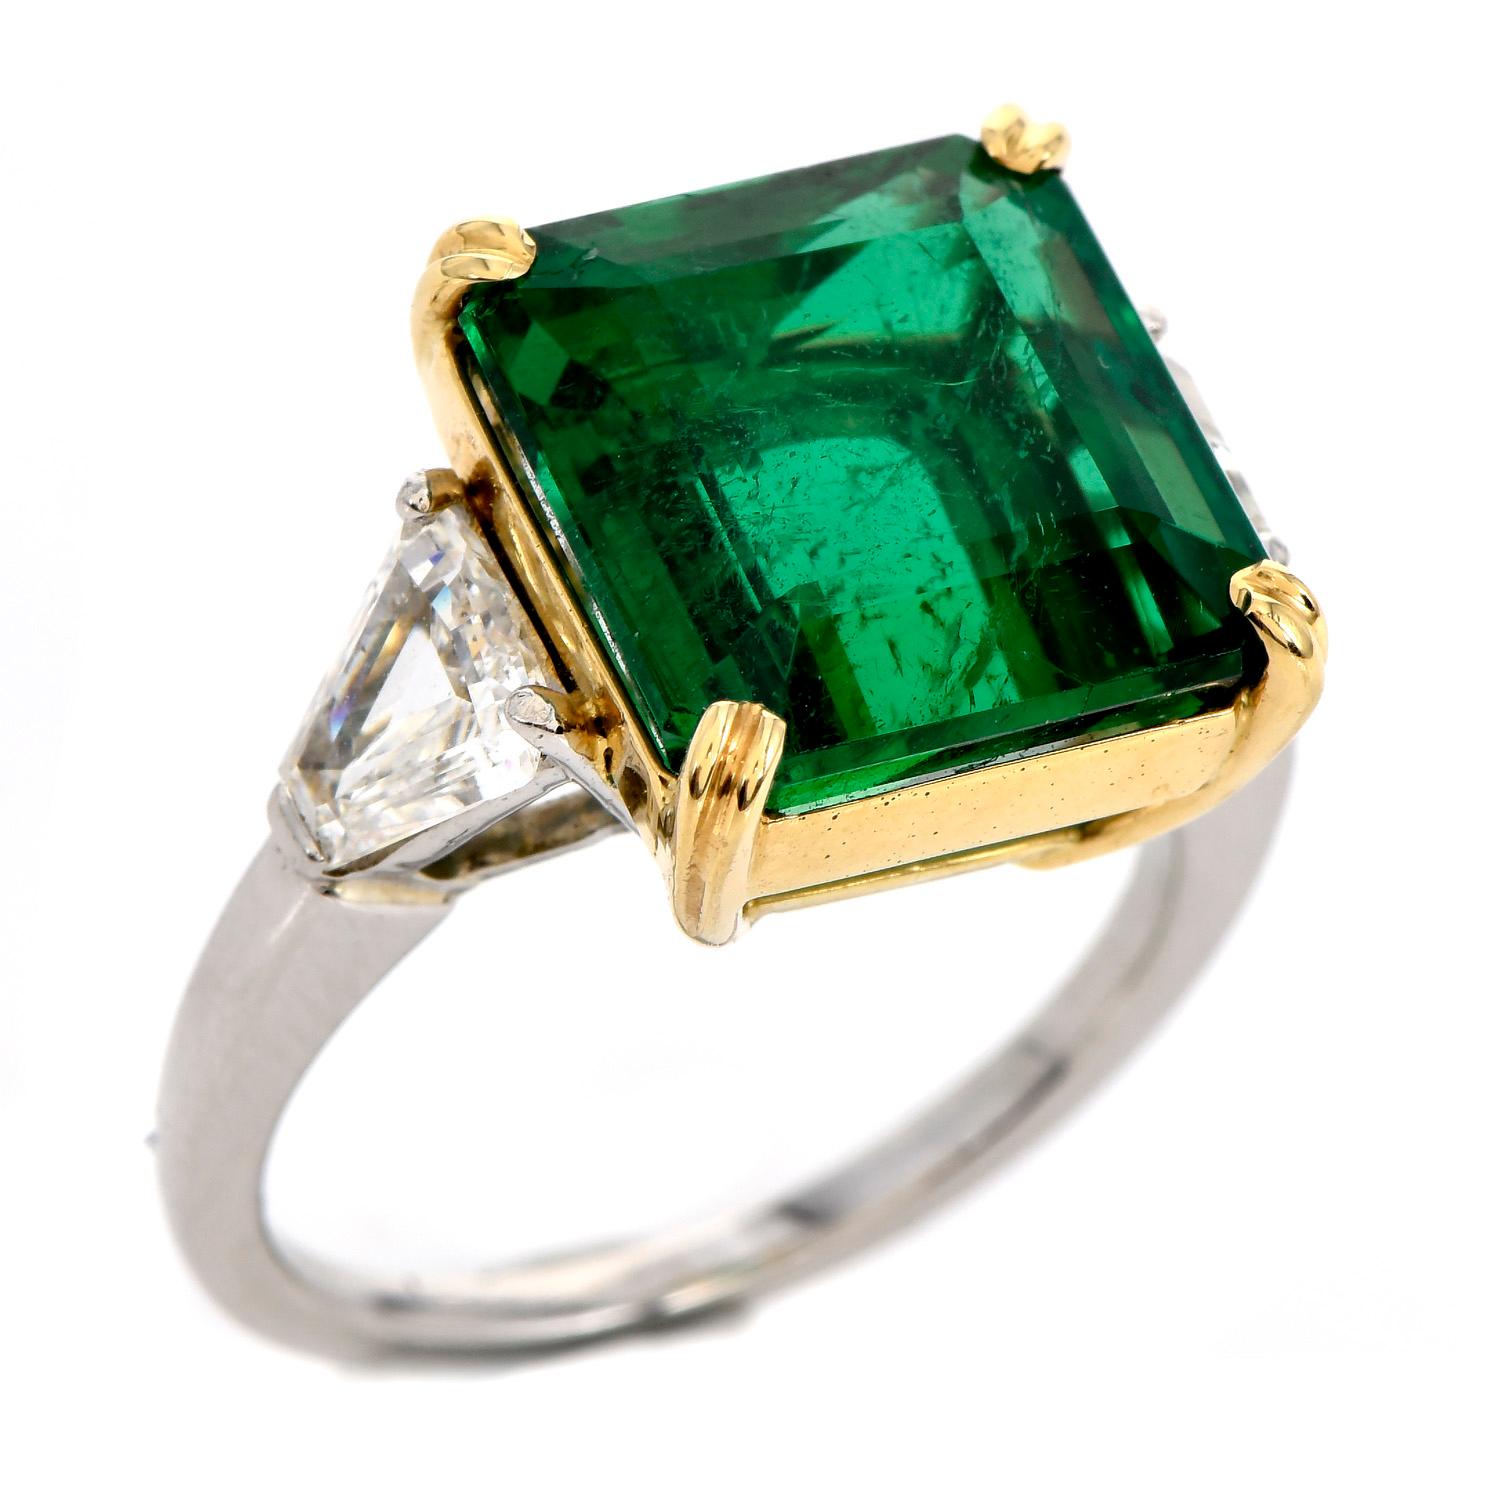 Emerald Cut Certified  9.02cts Zambian Emerald Diamond Platinum Cocktail Ring For Sale